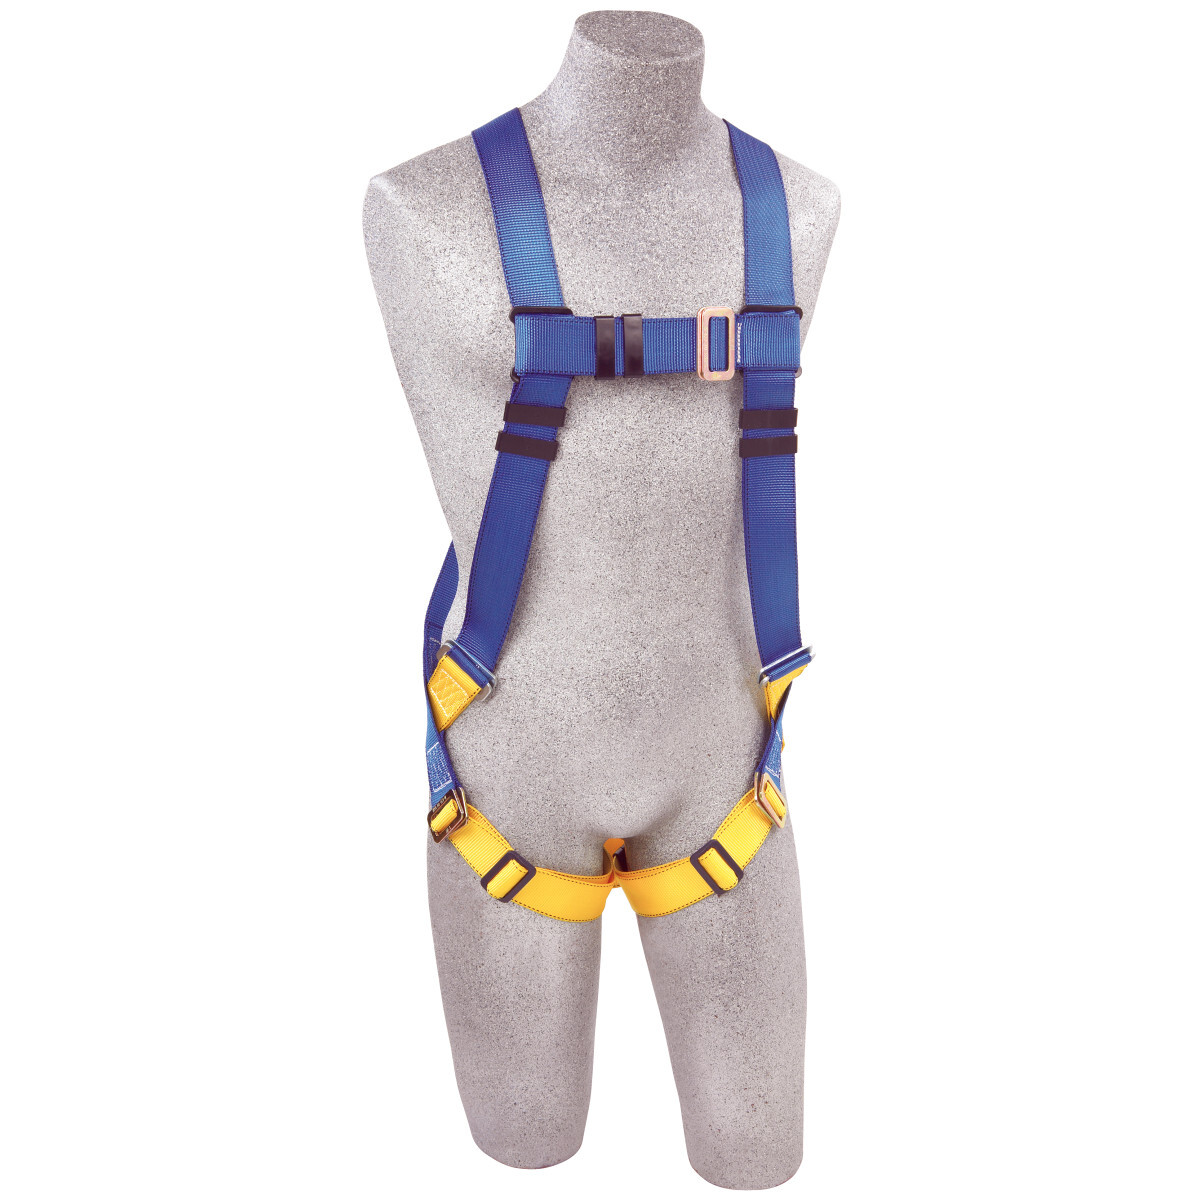 3M™ DBI-SALA® X-Large PROTECTA® FIRST™ Full Body Style 5-Point Harness With Back D-Ring And Pass-Thru Leg Strap Buckle